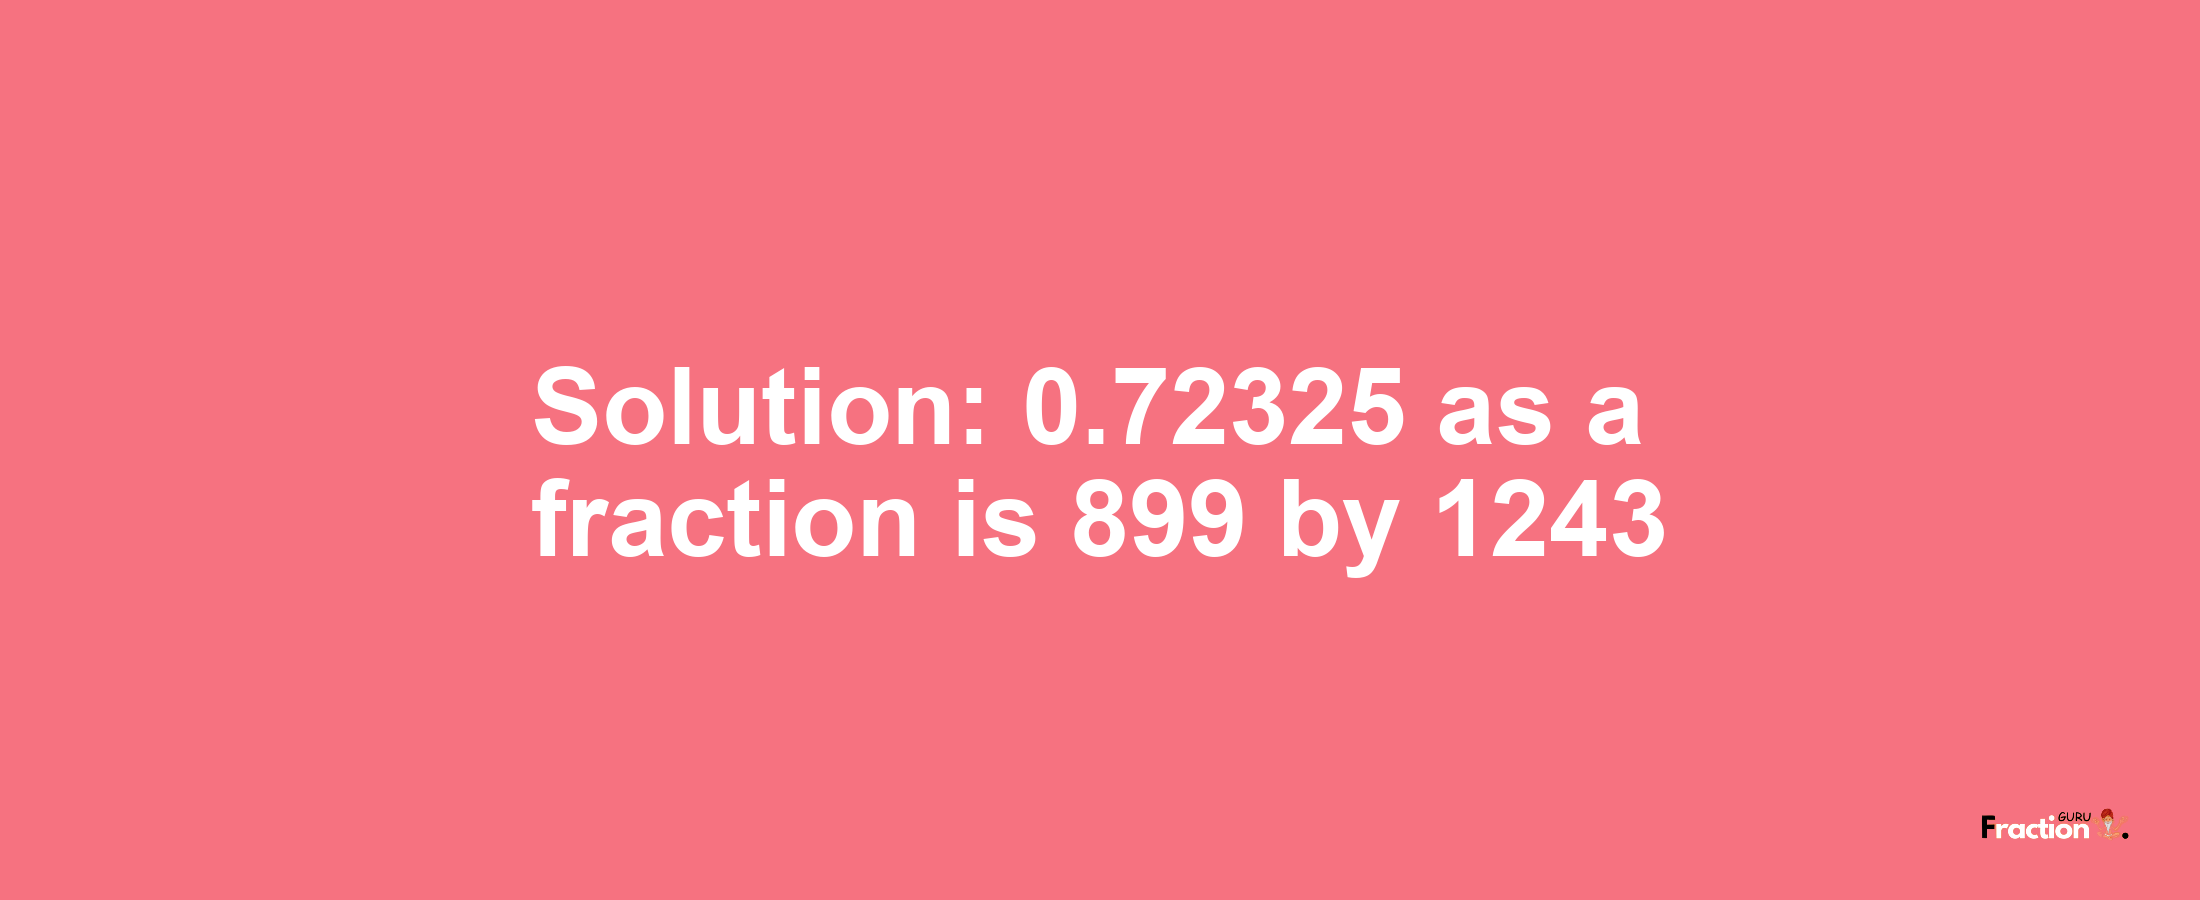 Solution:0.72325 as a fraction is 899/1243